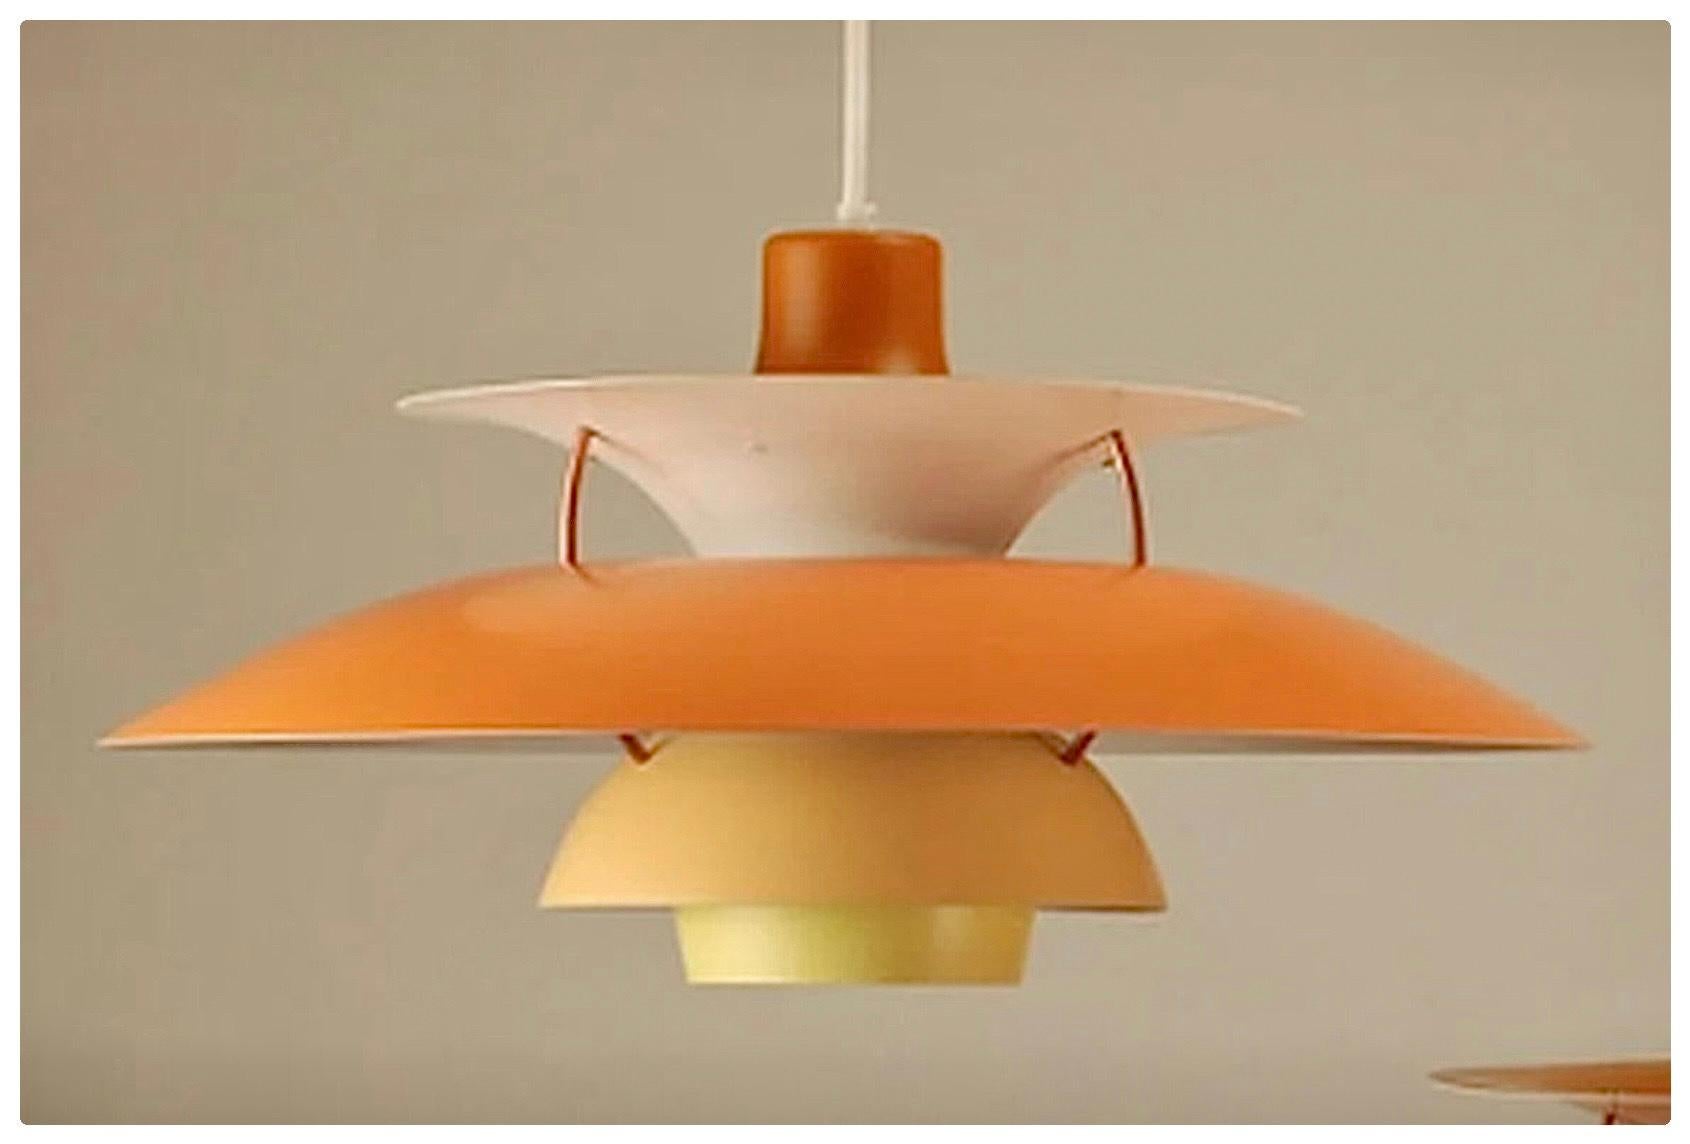 the little sister of the Louis Poulsen PH5, in a contemporary version
Orange on the outside, with crème and light blue accent inside
The different metal layers provide a nice play of light and shadow- also on the adjacent walls and or ceiling. 

